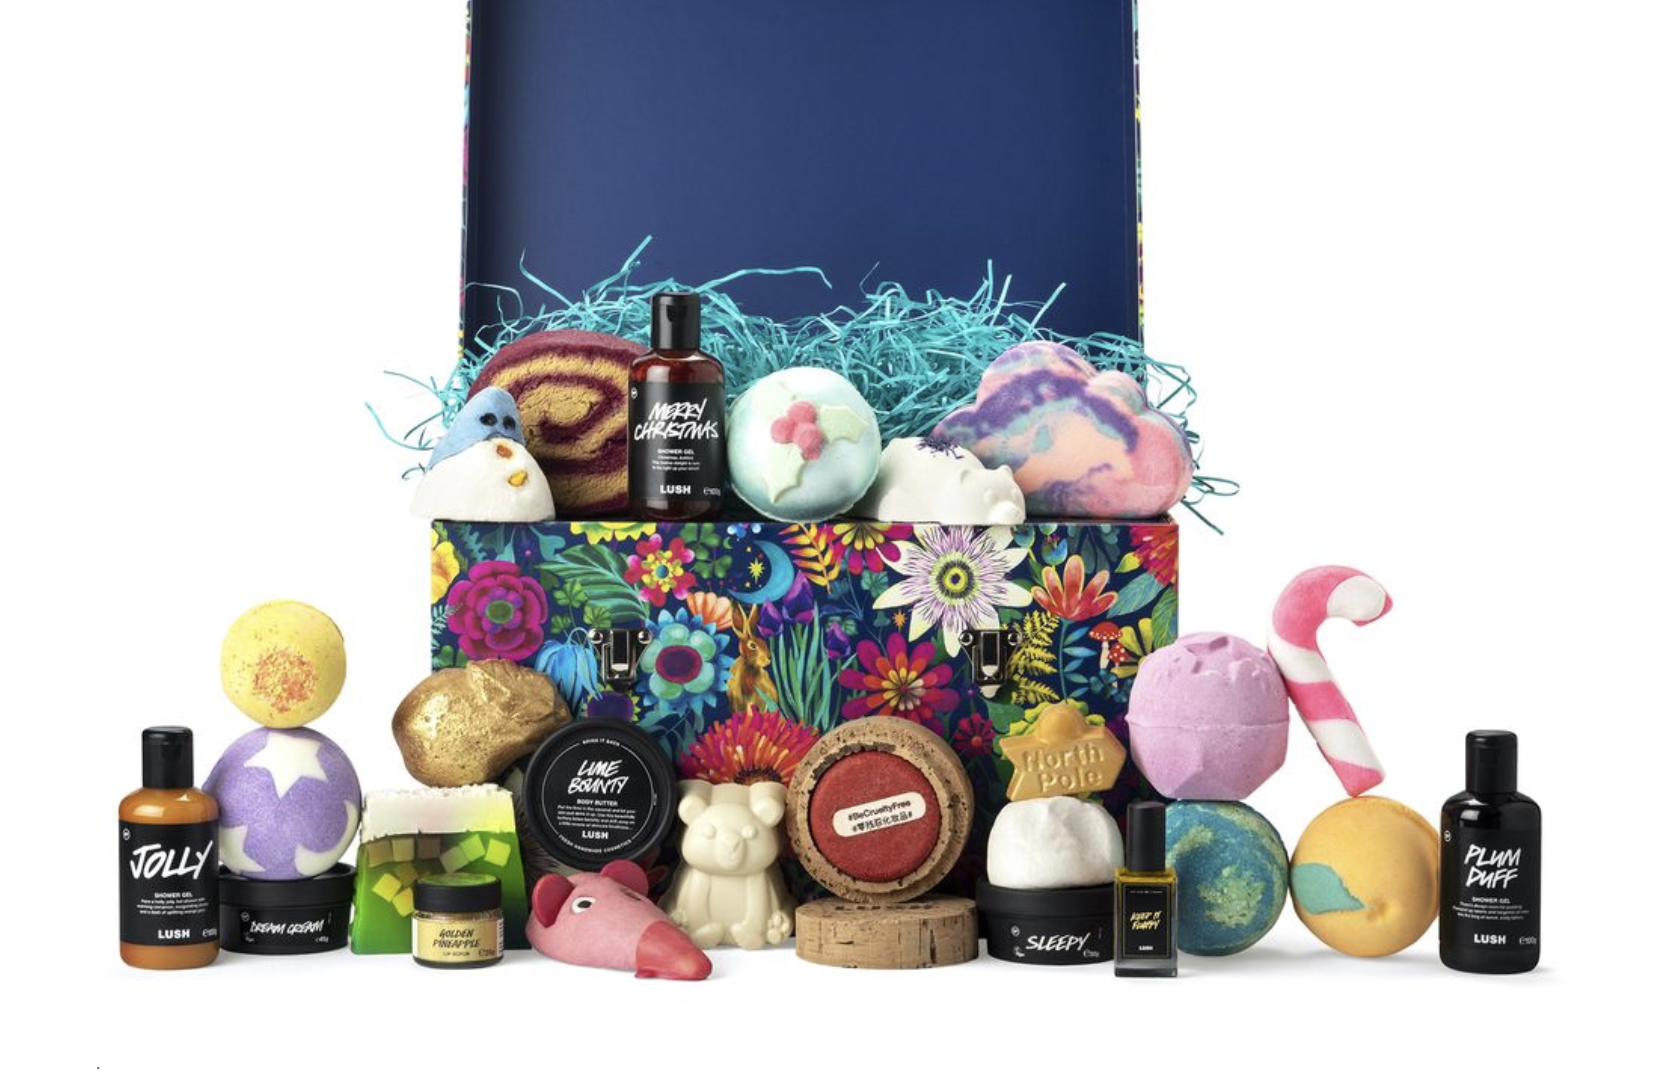 Lush Advent Calendar 2021: Available Now for UK Fans